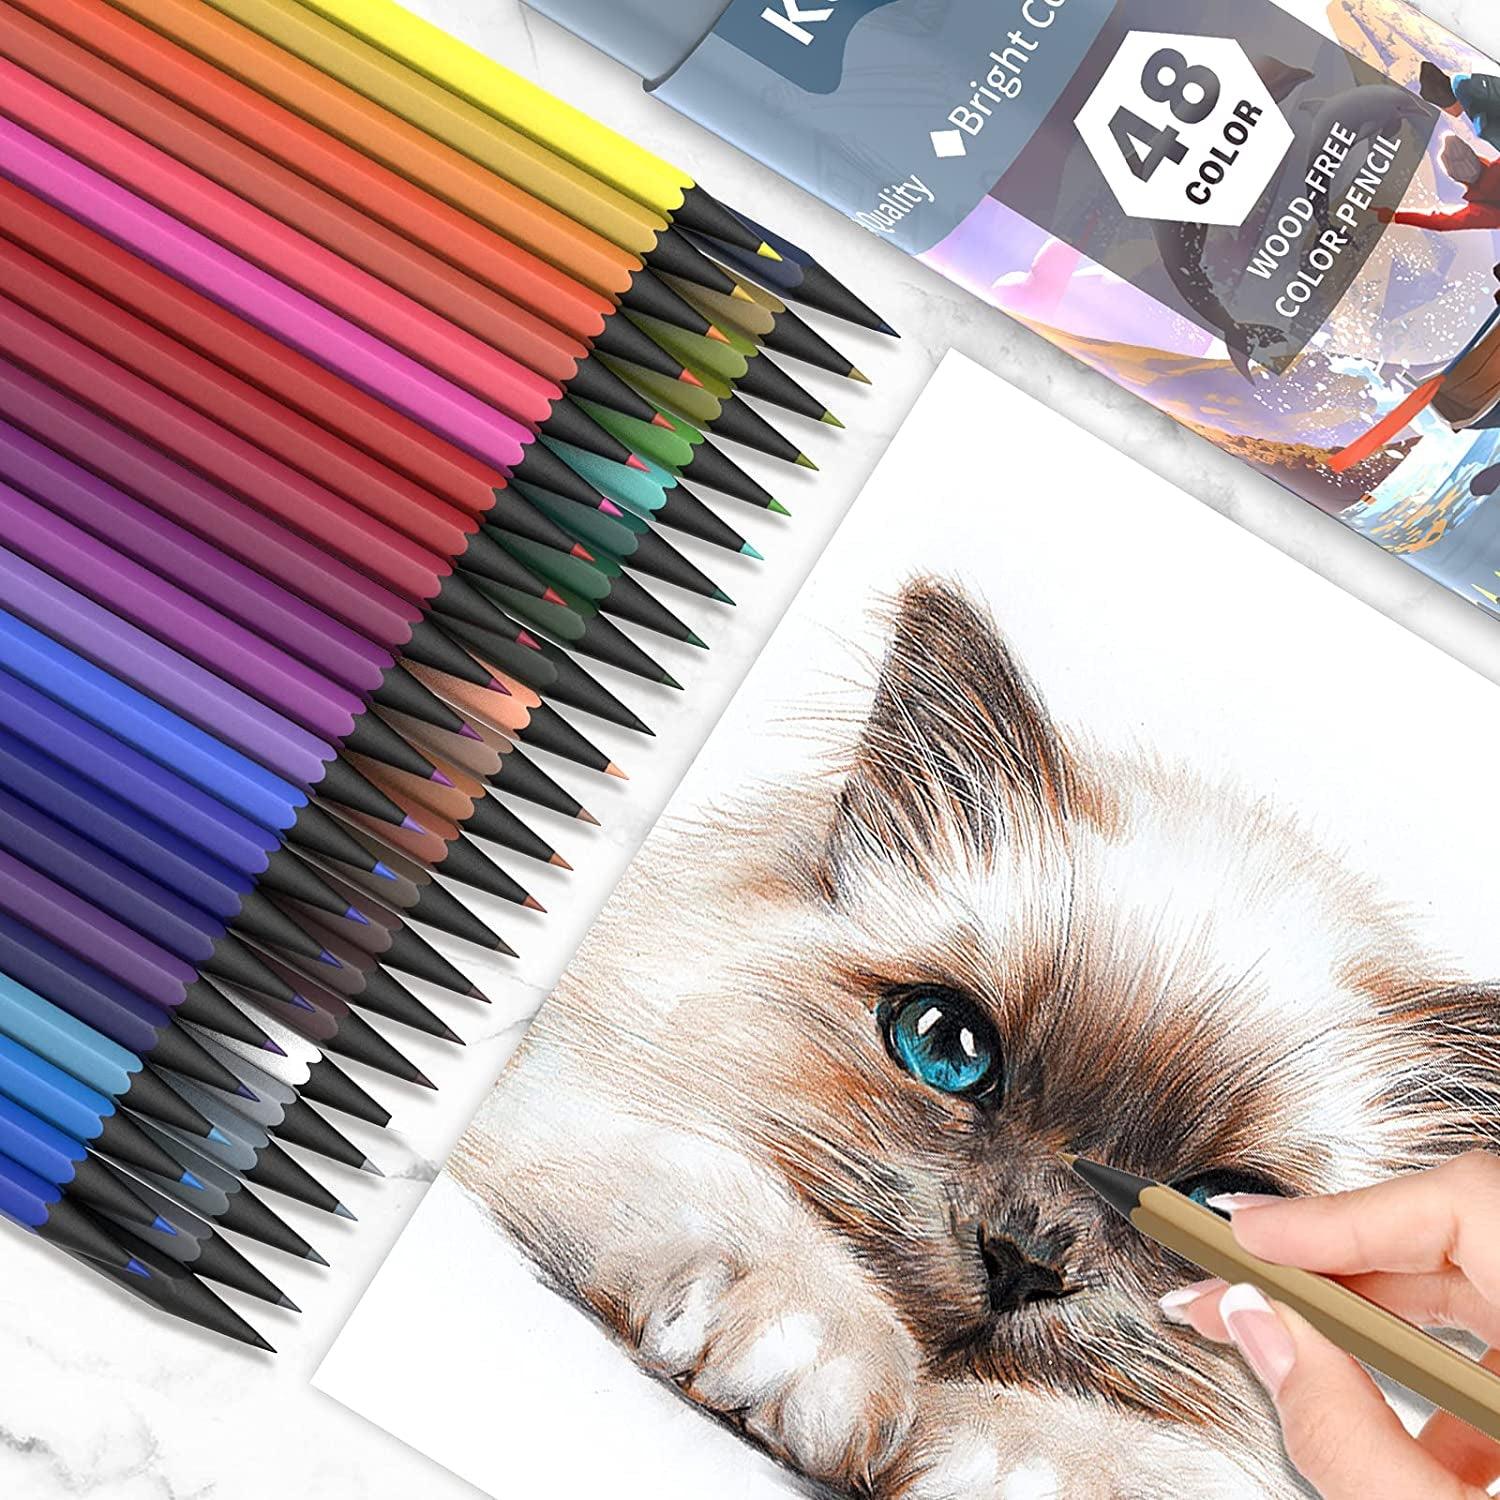 https://woodartsupply.com/cdn/shop/files/48-color-colored-pencils-suitable-for-adults-kids-and-coloring-books-artist-sketch-drawing-woodartsupply-7_930e830f-dc83-4b90-9635-758e984423aa.jpg?v=1696162355&width=1946